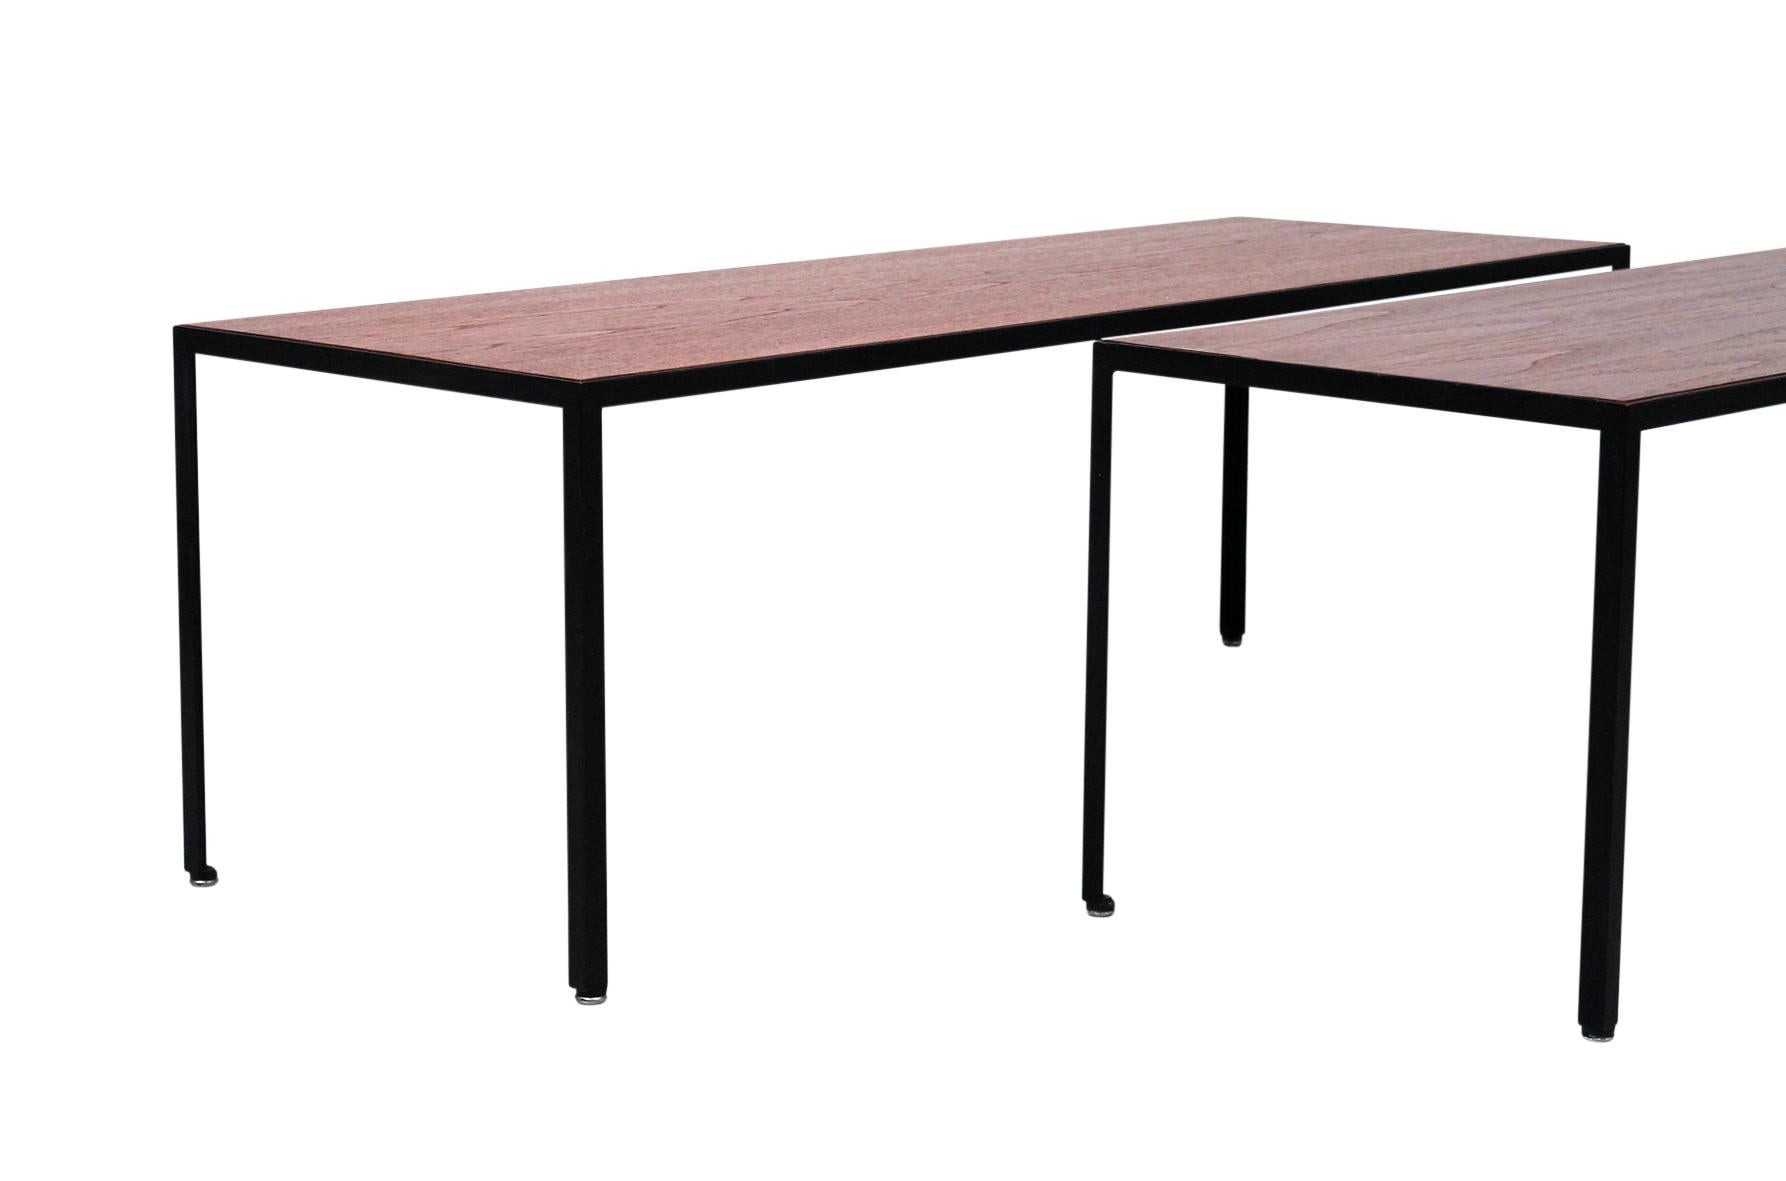 Pair of Angle Iron Tables by George Nelson 1